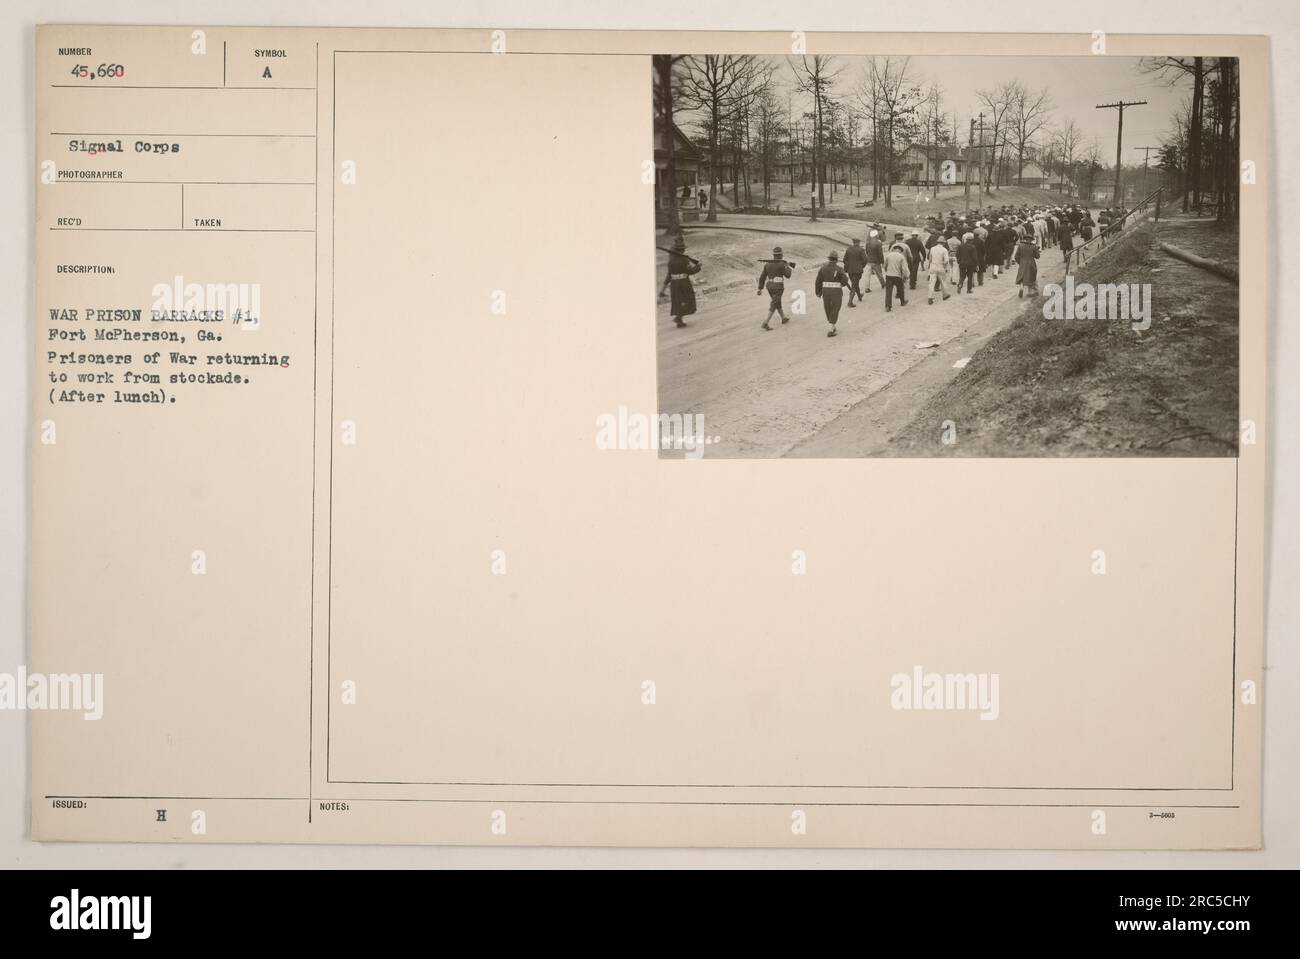 War prisoners at Fort McPherson in Georgia returning to work after lunch. The photograph shows a scene depicting prisoners of war outside the stockade. This image was taken by a photographer from the Signal Corps and the prisoners are labeled as number 45,660. Stock Photo